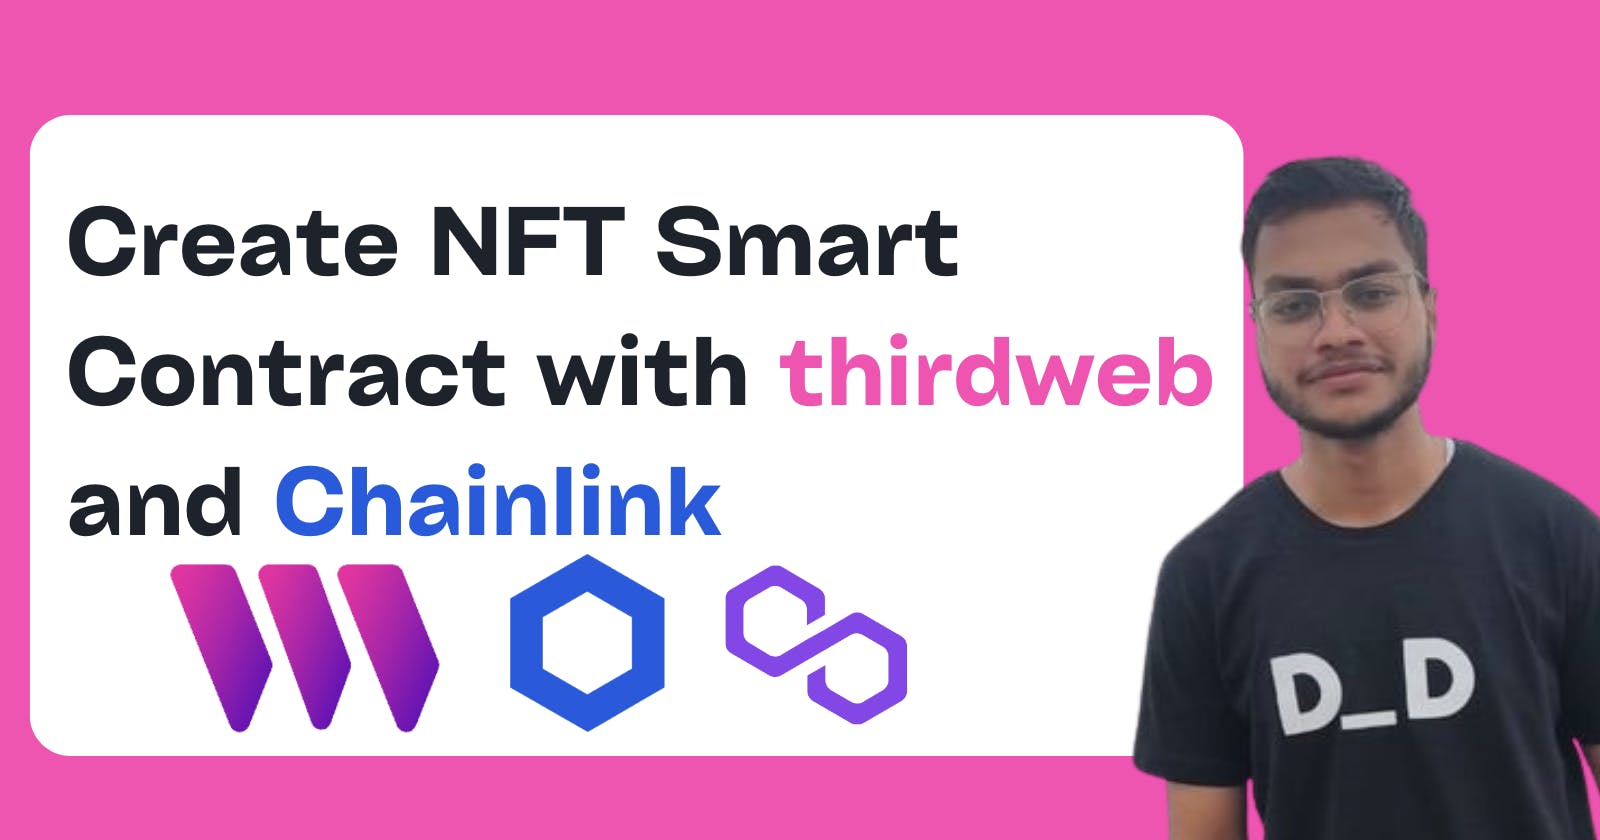 Create NFT Smart Contract with thirdweb and Chainlink